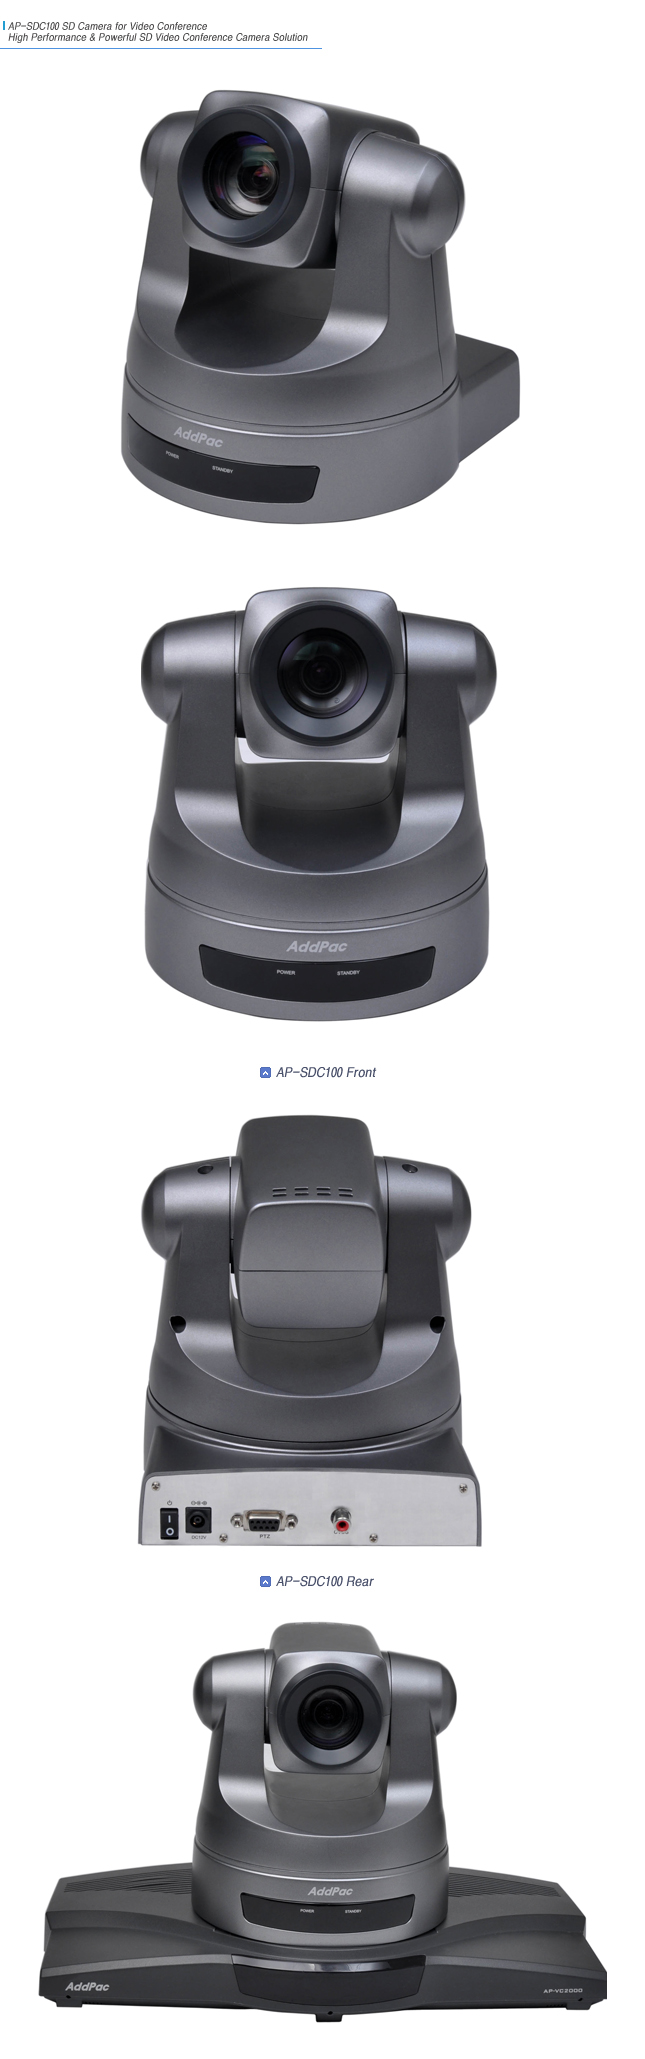 AP-SDC100 SD Video Conference Camera   | AddPac